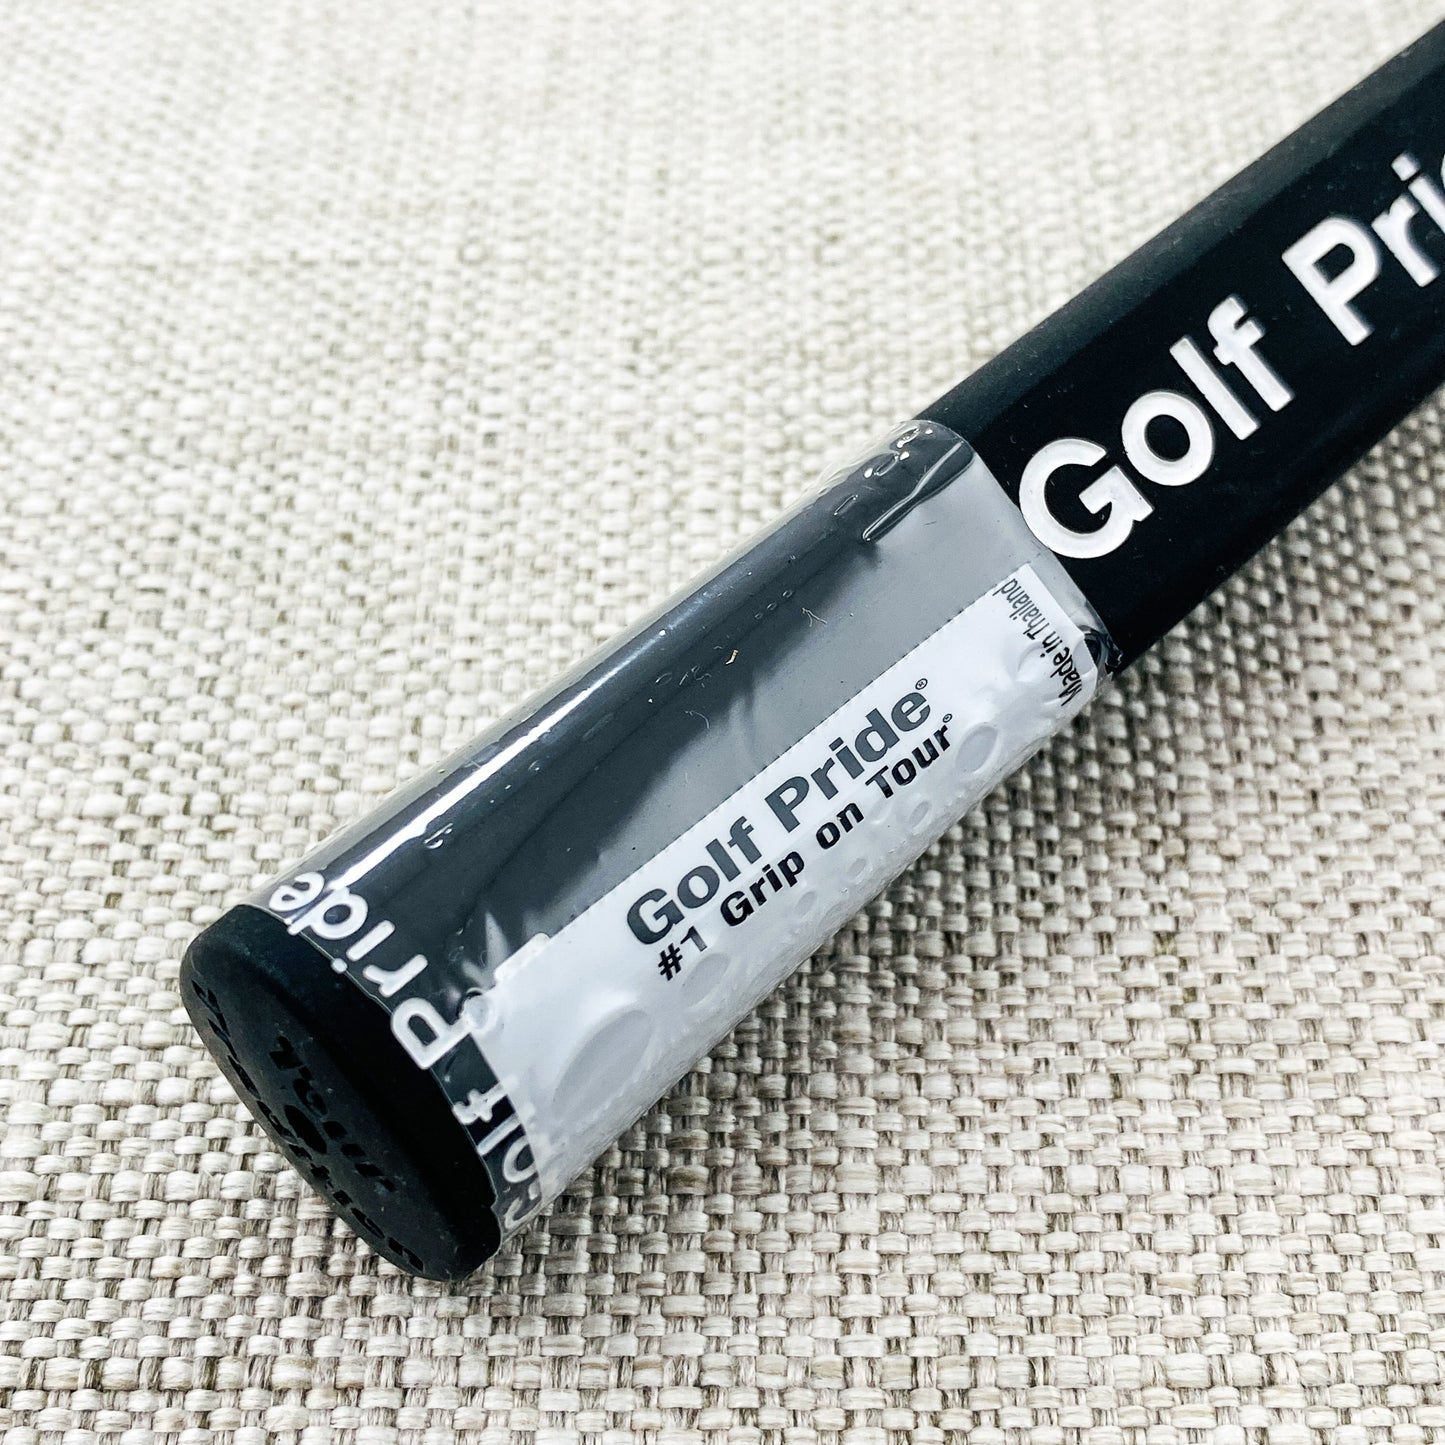 Golf Pride Tour Tradition pistol putter grip. Black - Price includes fitment.